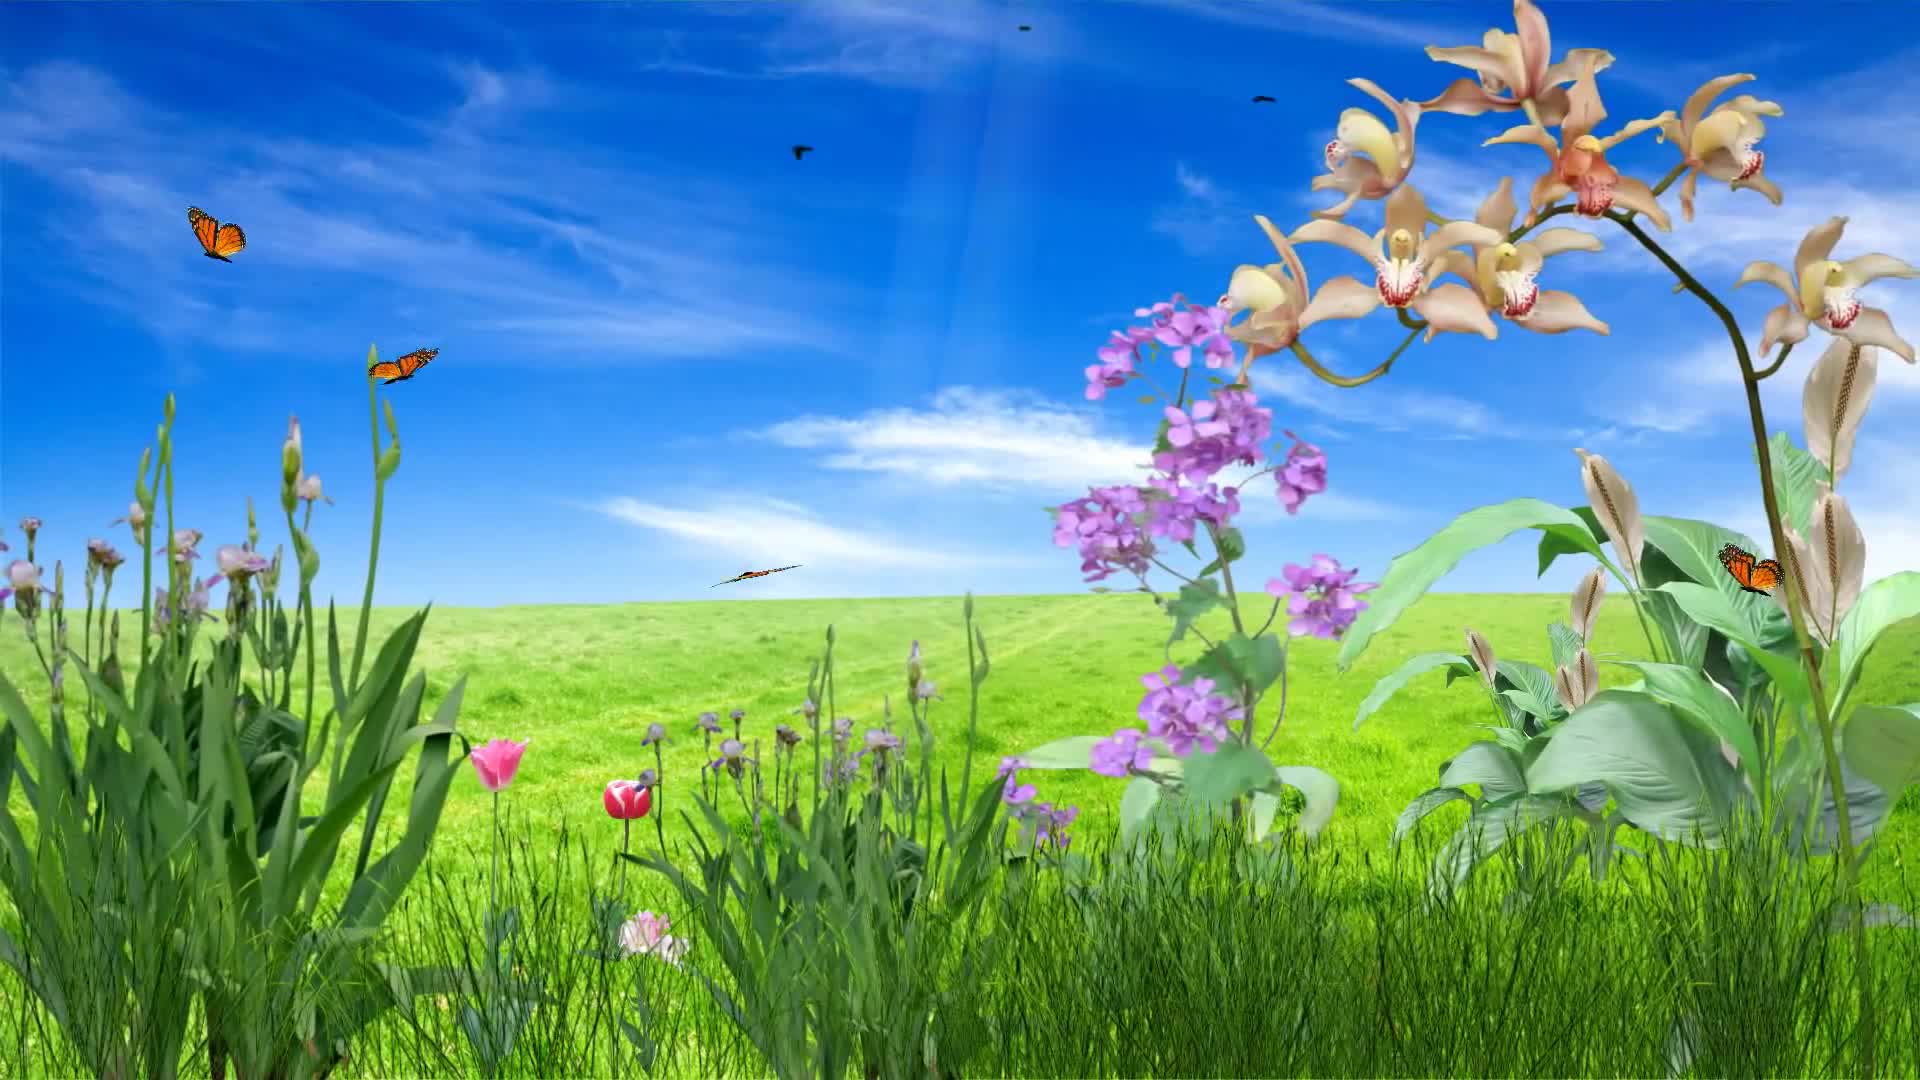 Animated Flower Wallpapers - 4k, HD Animated Flower Backgrounds on ...